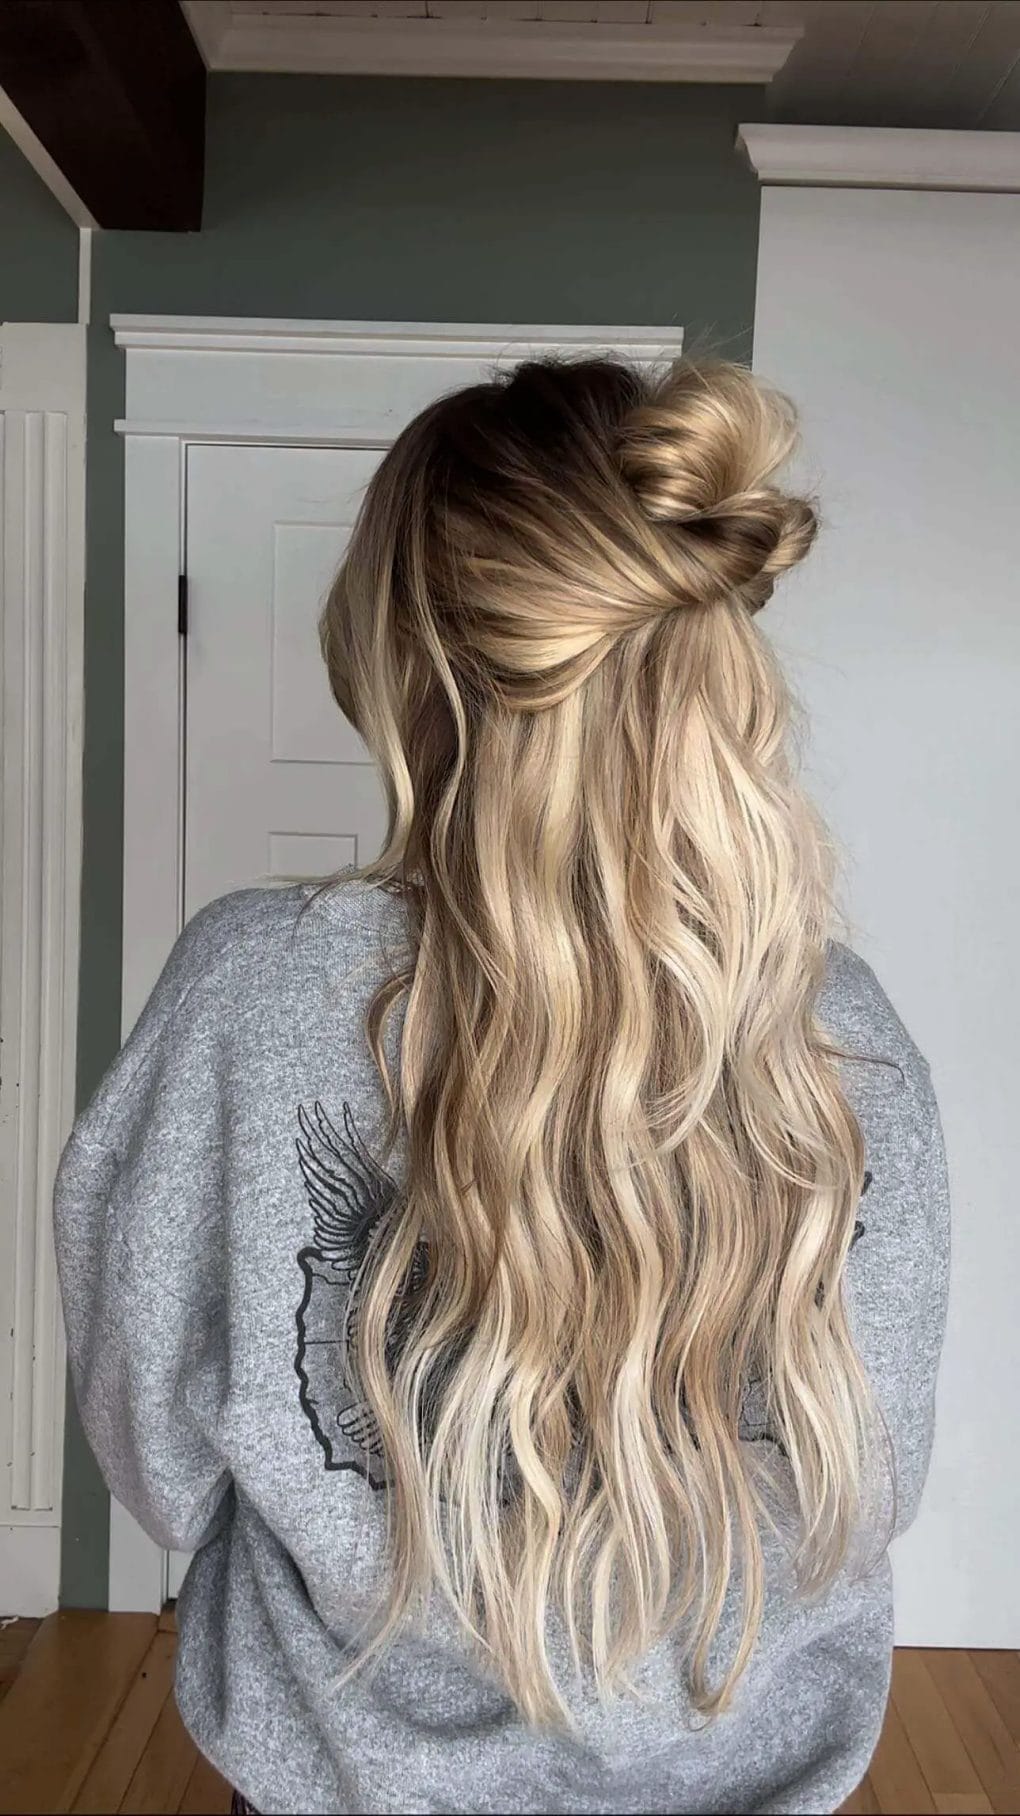 Elegant top knot twist with full waves for a balanced birthday hairstyle.